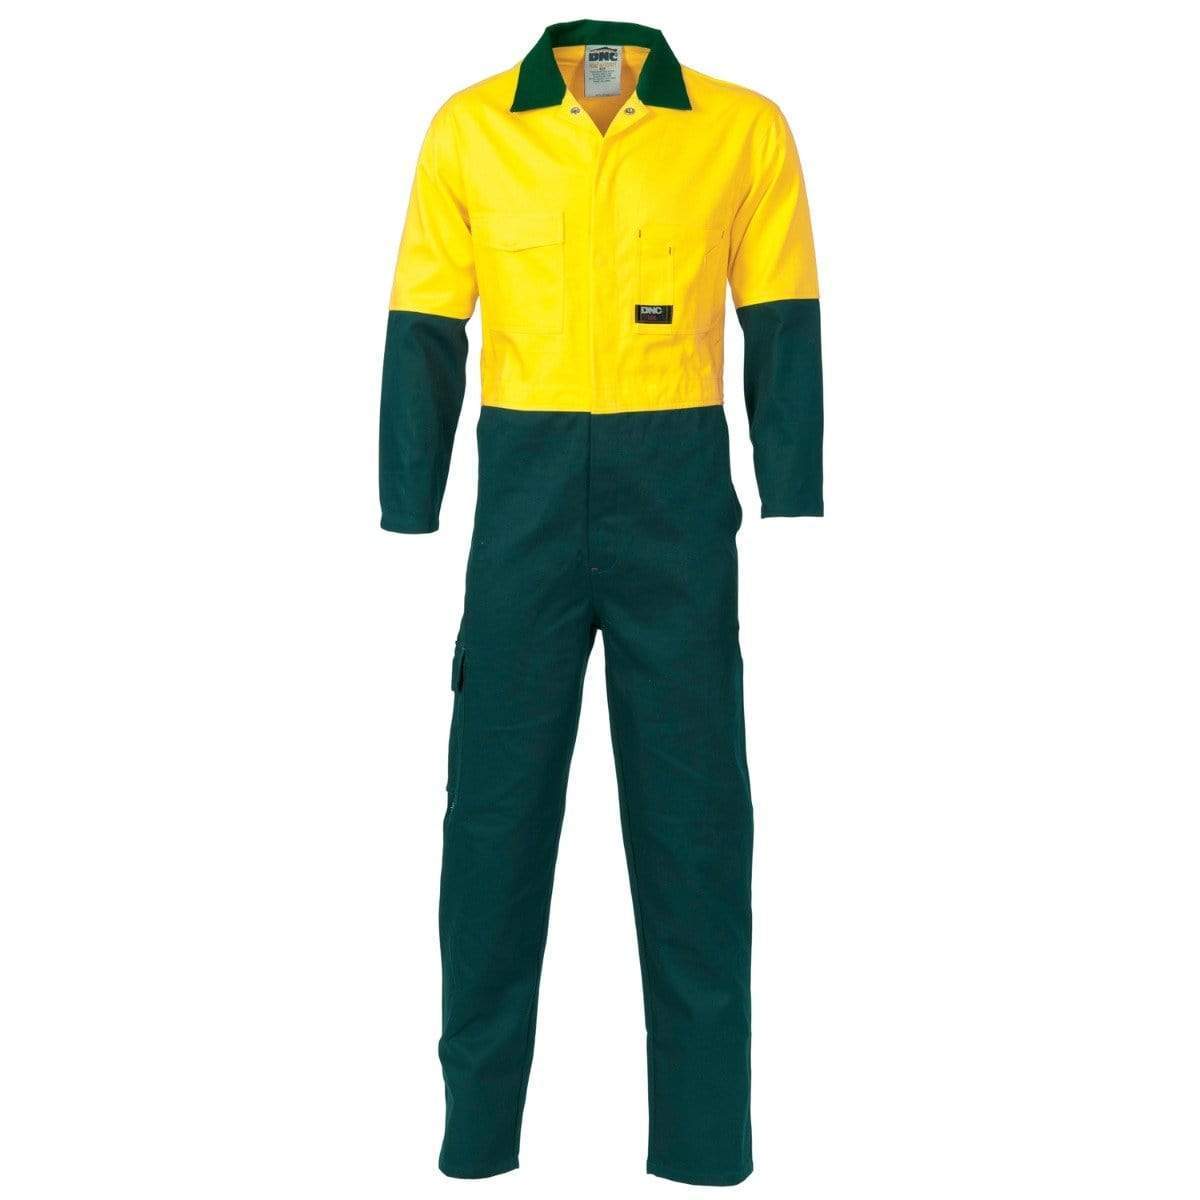 Dnc Workwear Hi-vis Two-tone Cotton Coverall - 3851 Work Wear DNC Workwear Yellow/Bottle Green 77R 